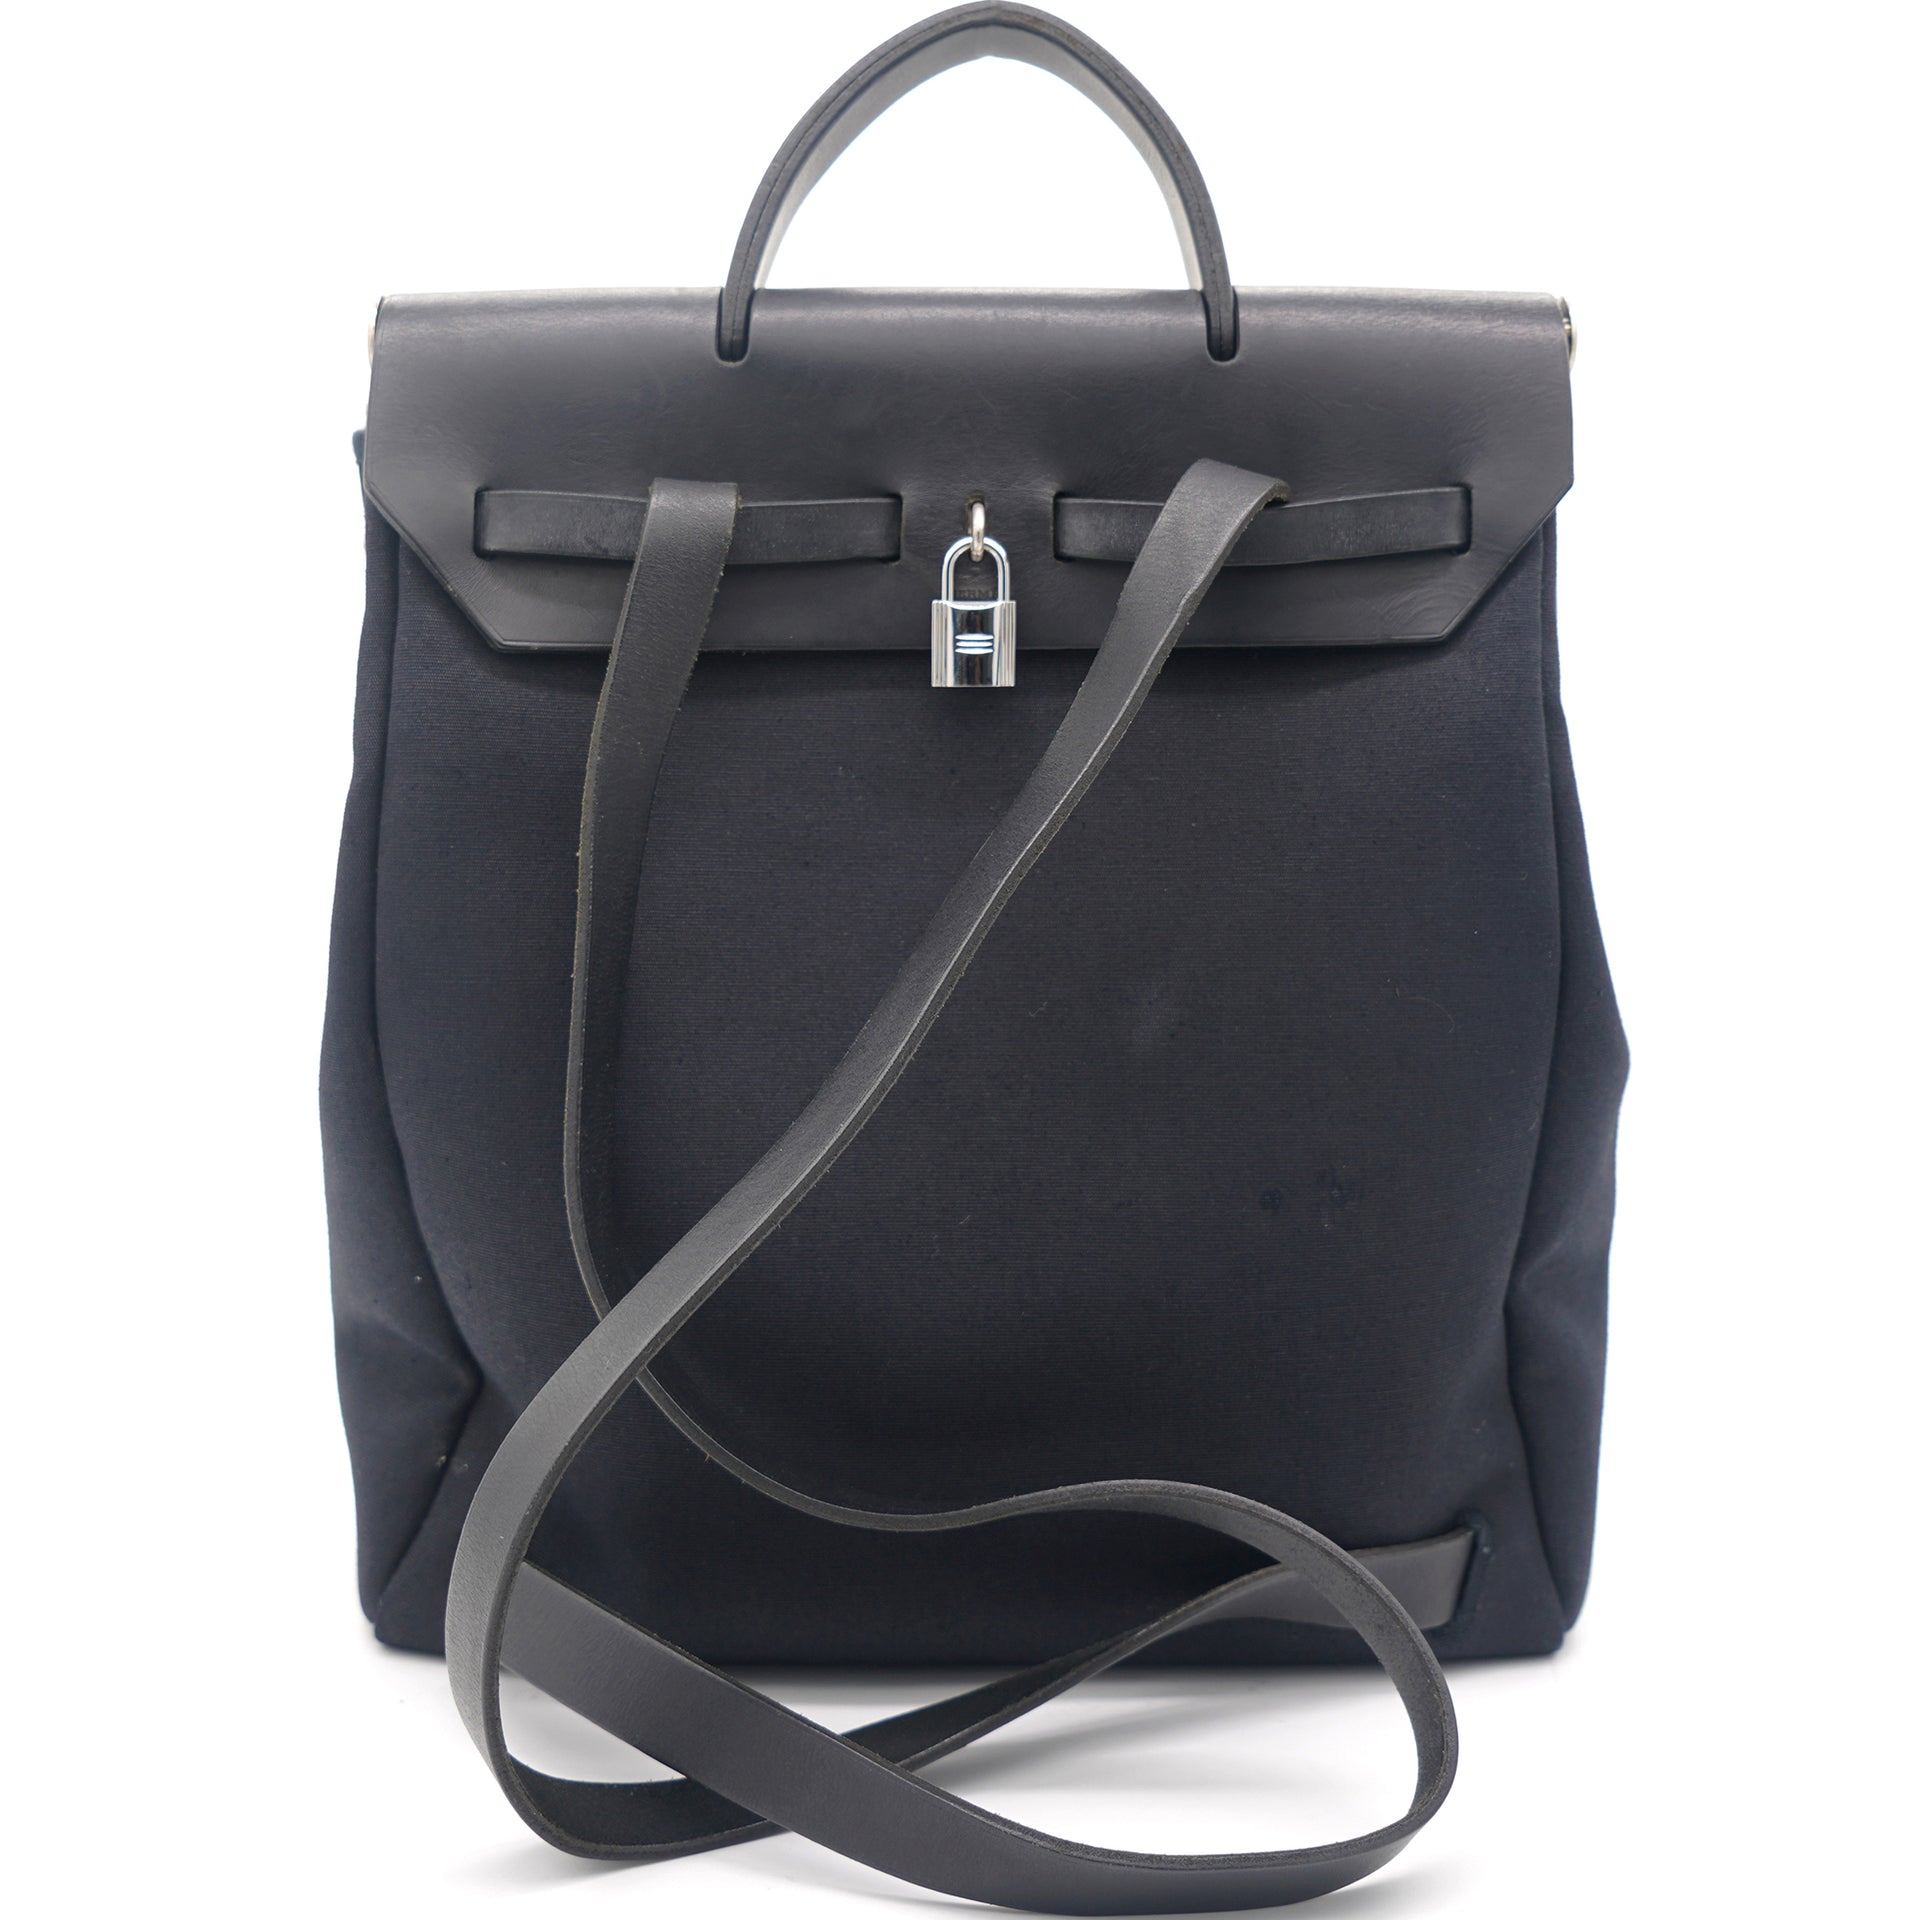 Black Canvas and Leather 2-in-1 Herbag PM Backpack